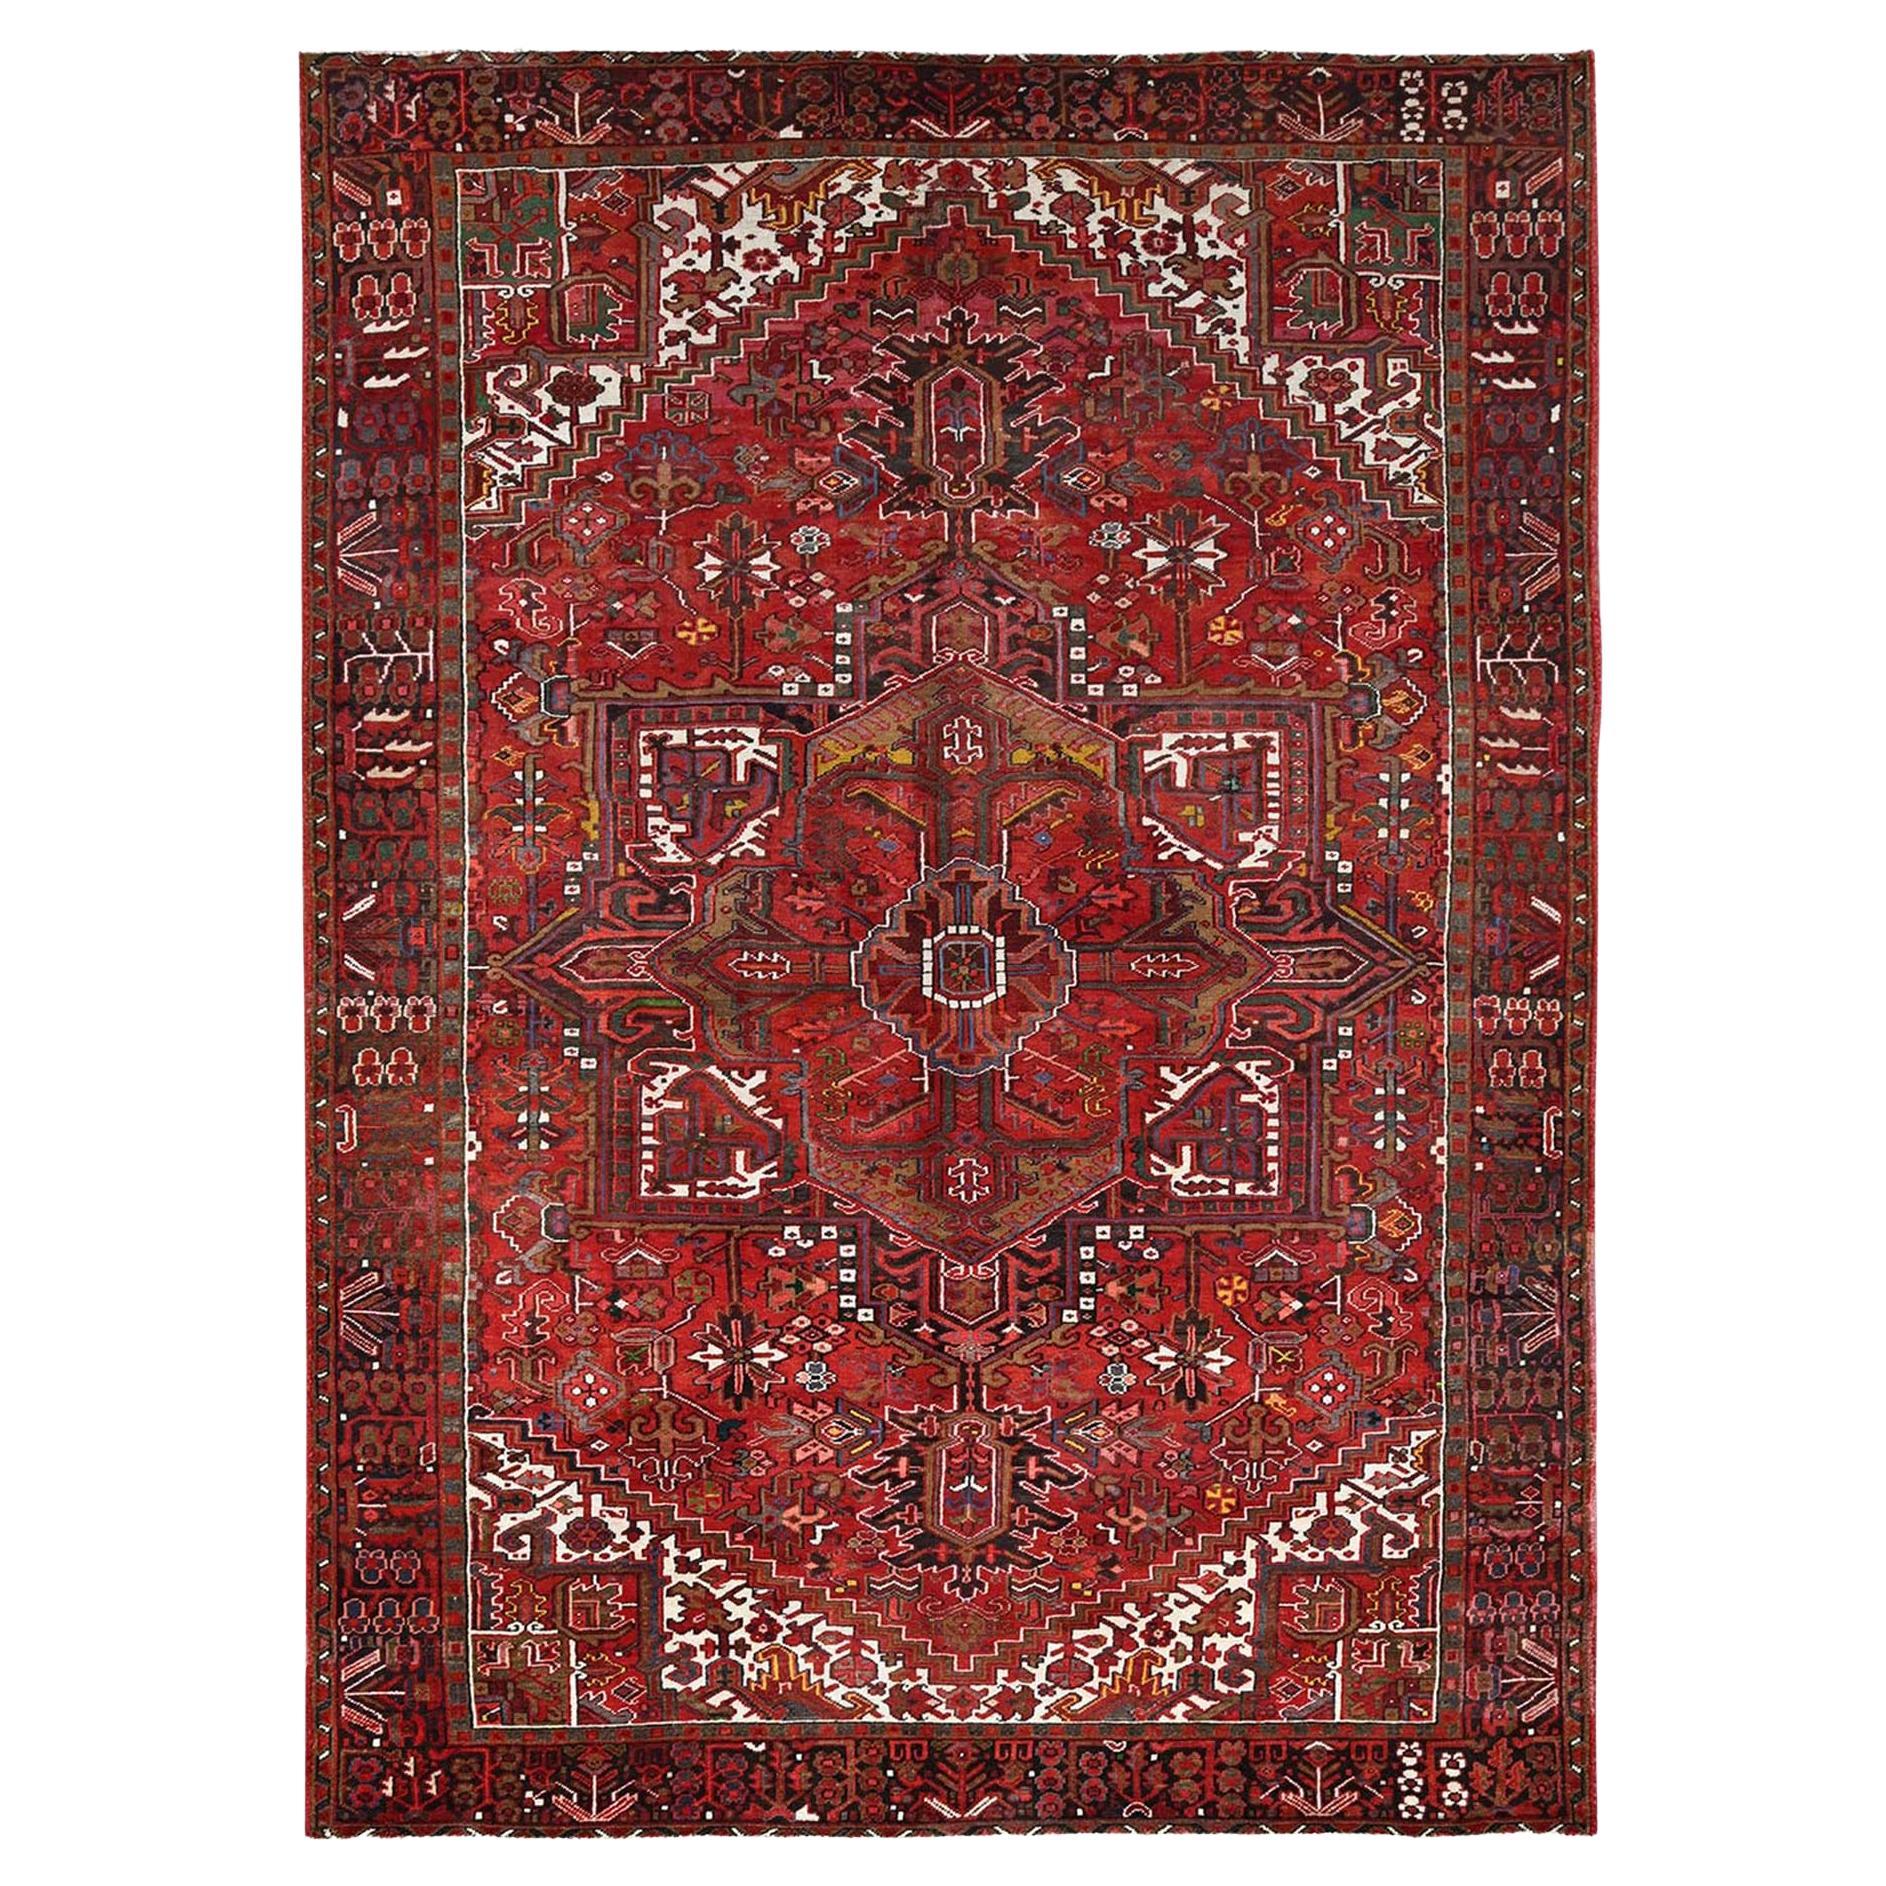 Imperial Red Semi Antique Persian Heriz Rustic Feel Worn Wool Hand Knotted Rug